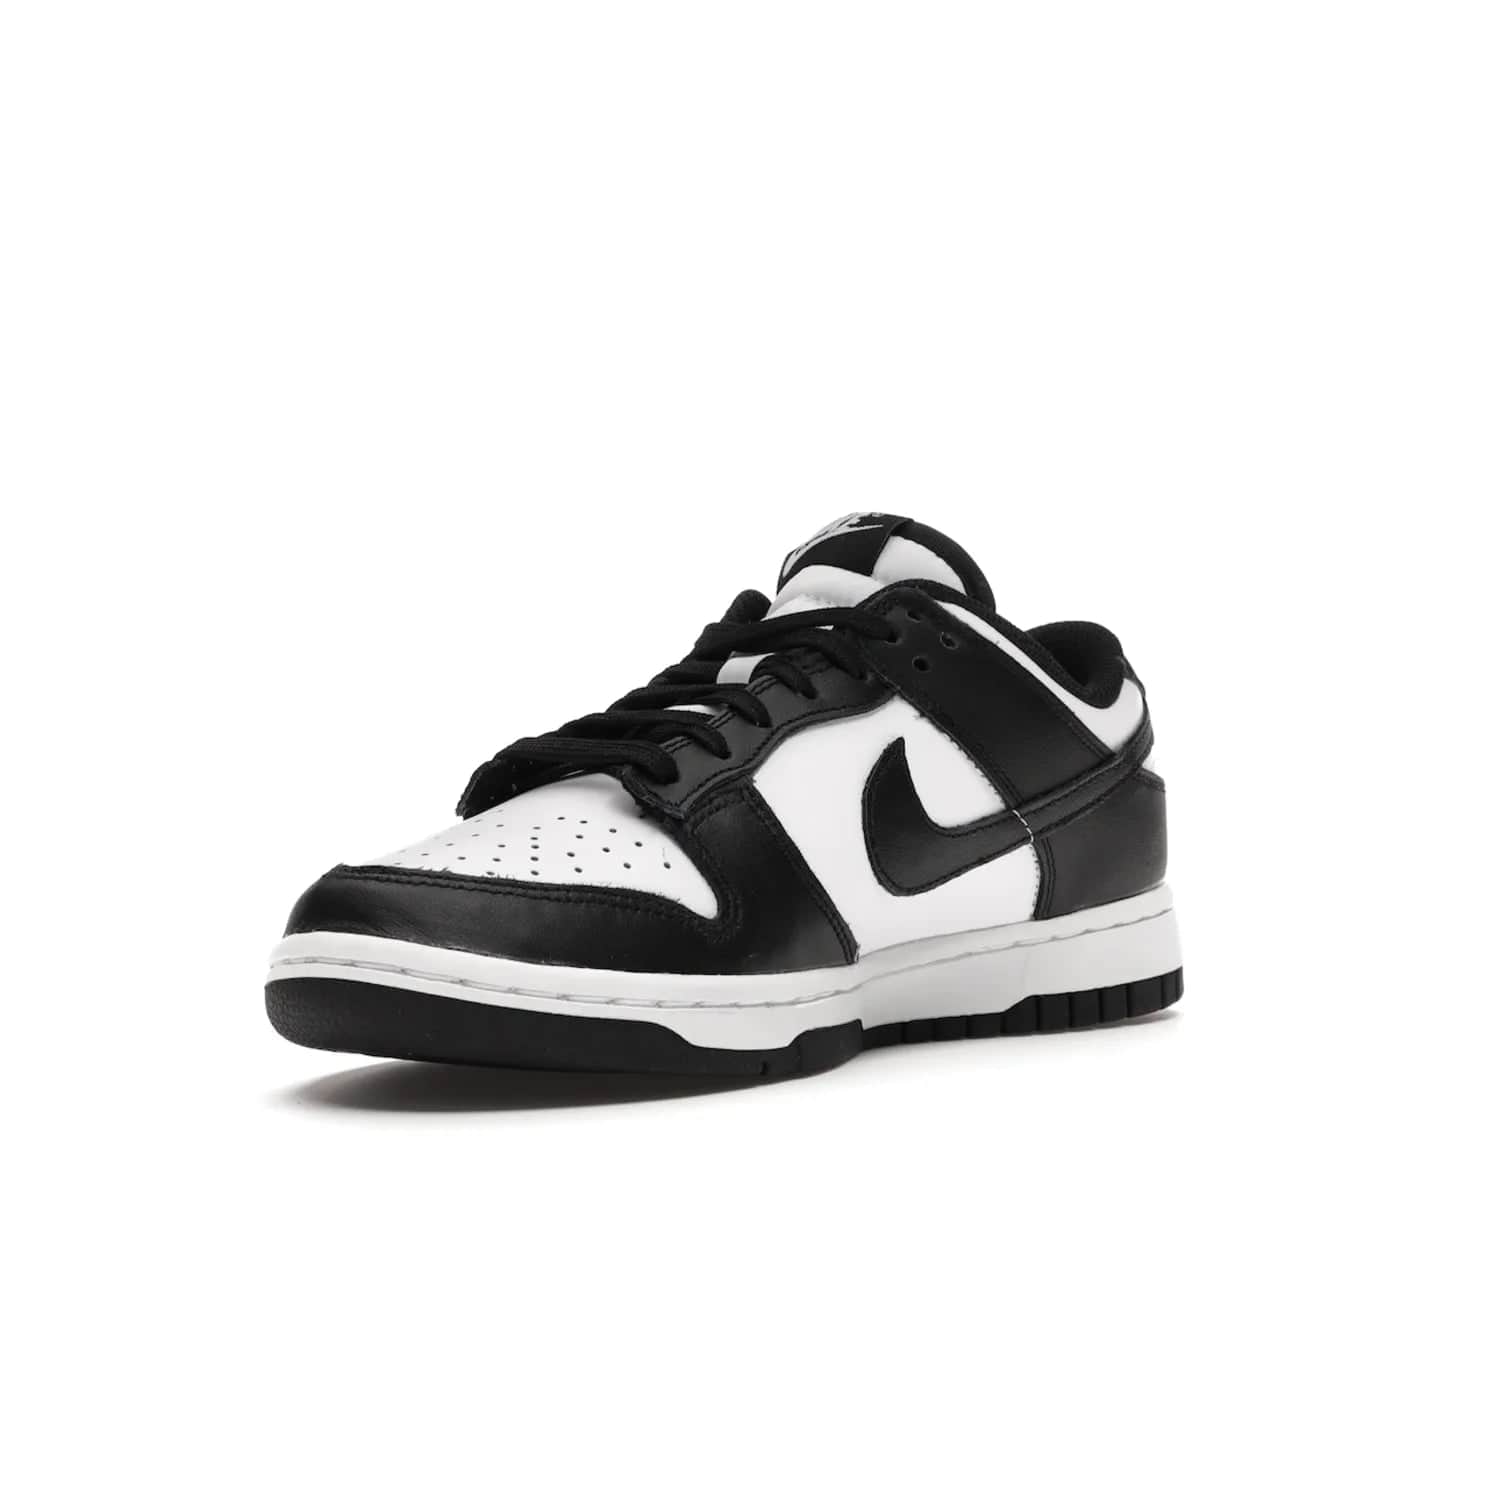 Nike Dunk Low Retro White Black Panda (2021) (Women's) - Image 14 - Only at www.BallersClubKickz.com - Say hello to the new Nike Dunk Low Retro White Black Panda (2021) (Women's)! White & black leather upper with Nike Swoosh logo. Get your pair for $100 in March 2021! Shop now!